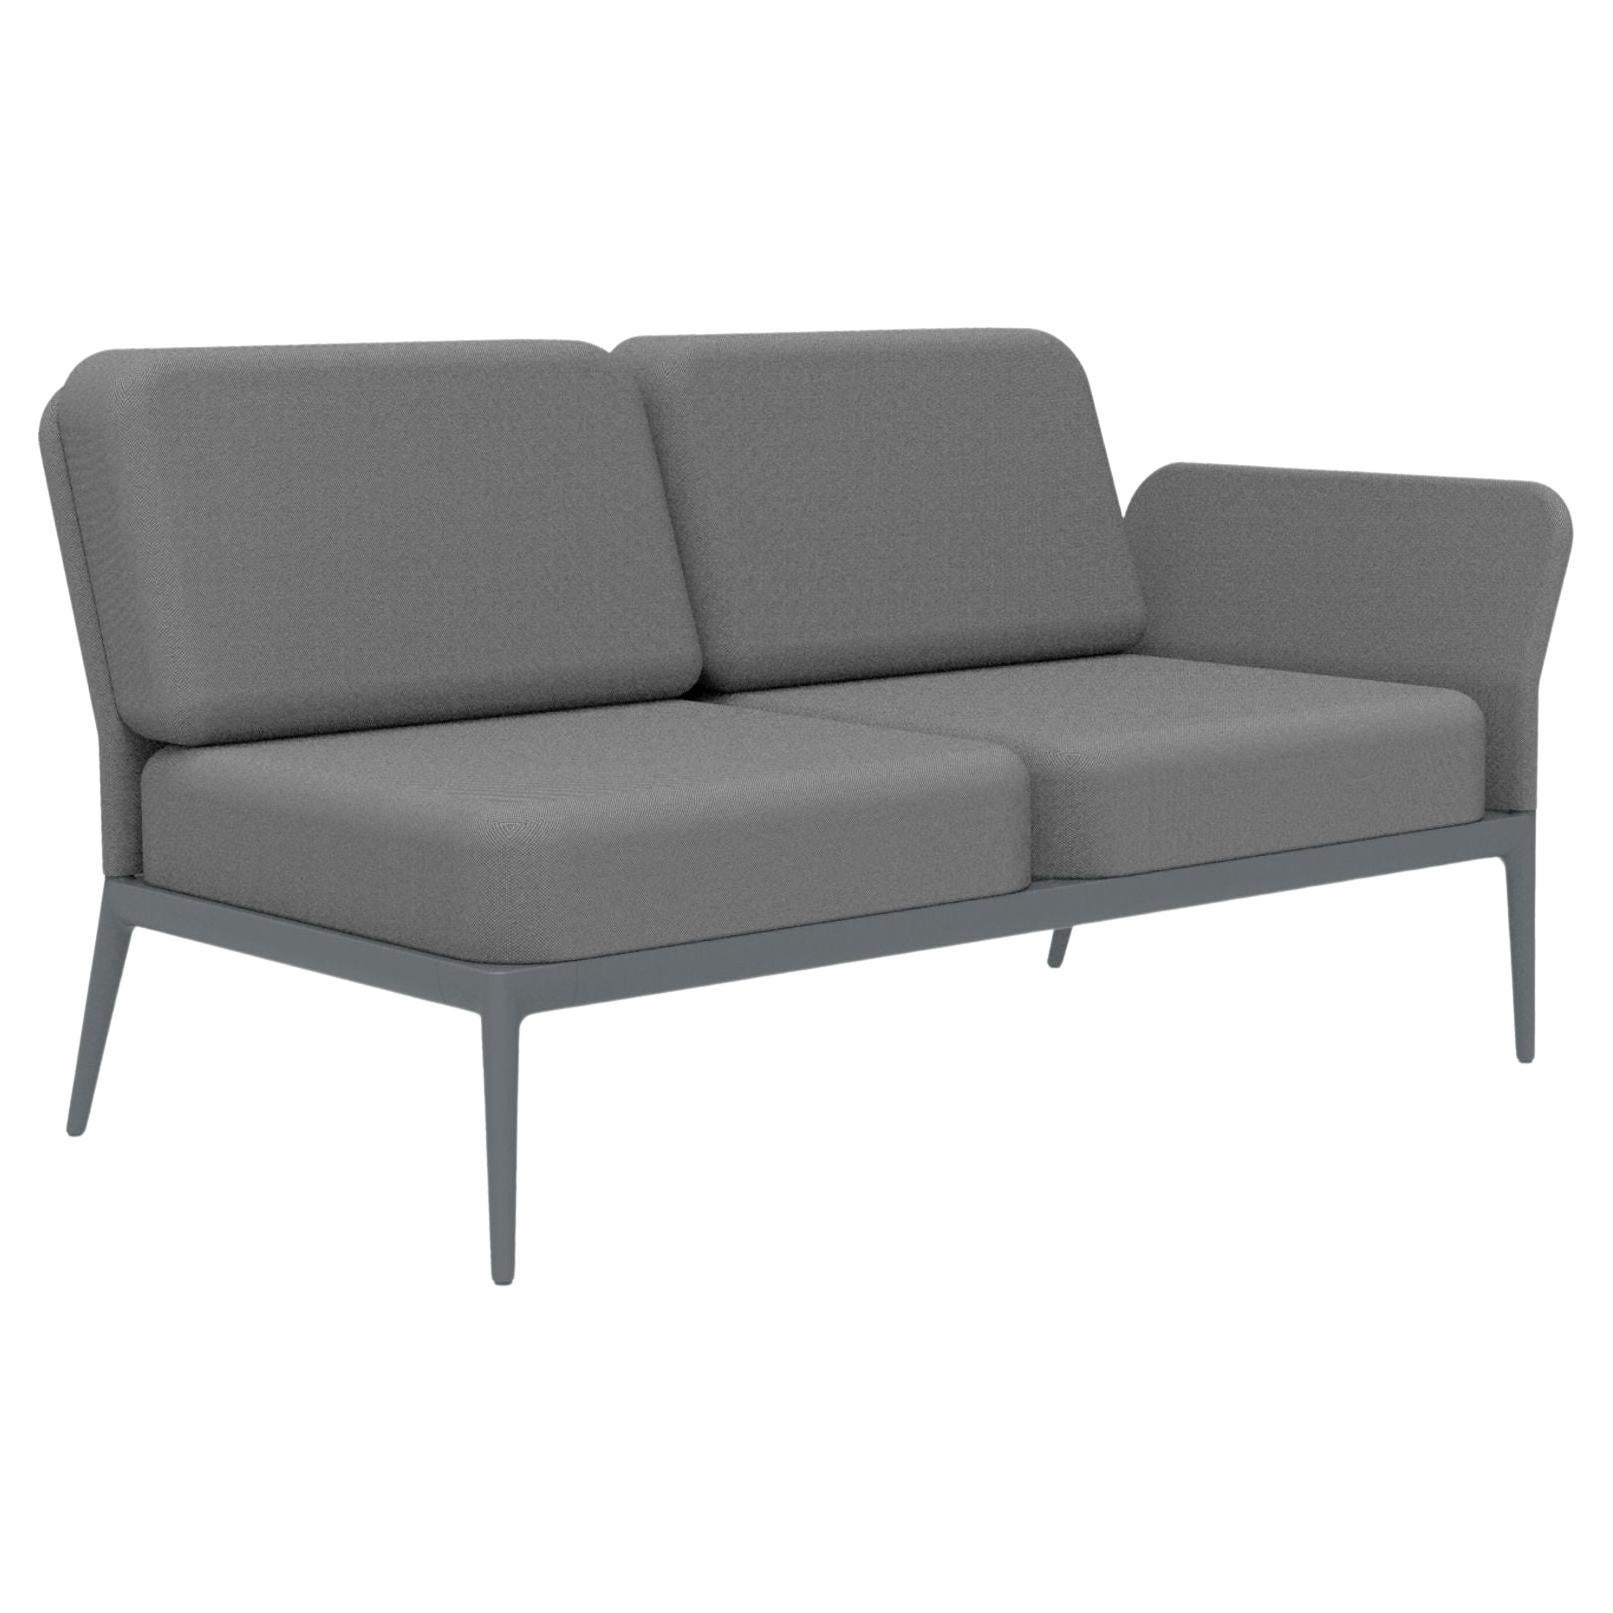 Cover Grey Double Left Modular Sofa by Mowee